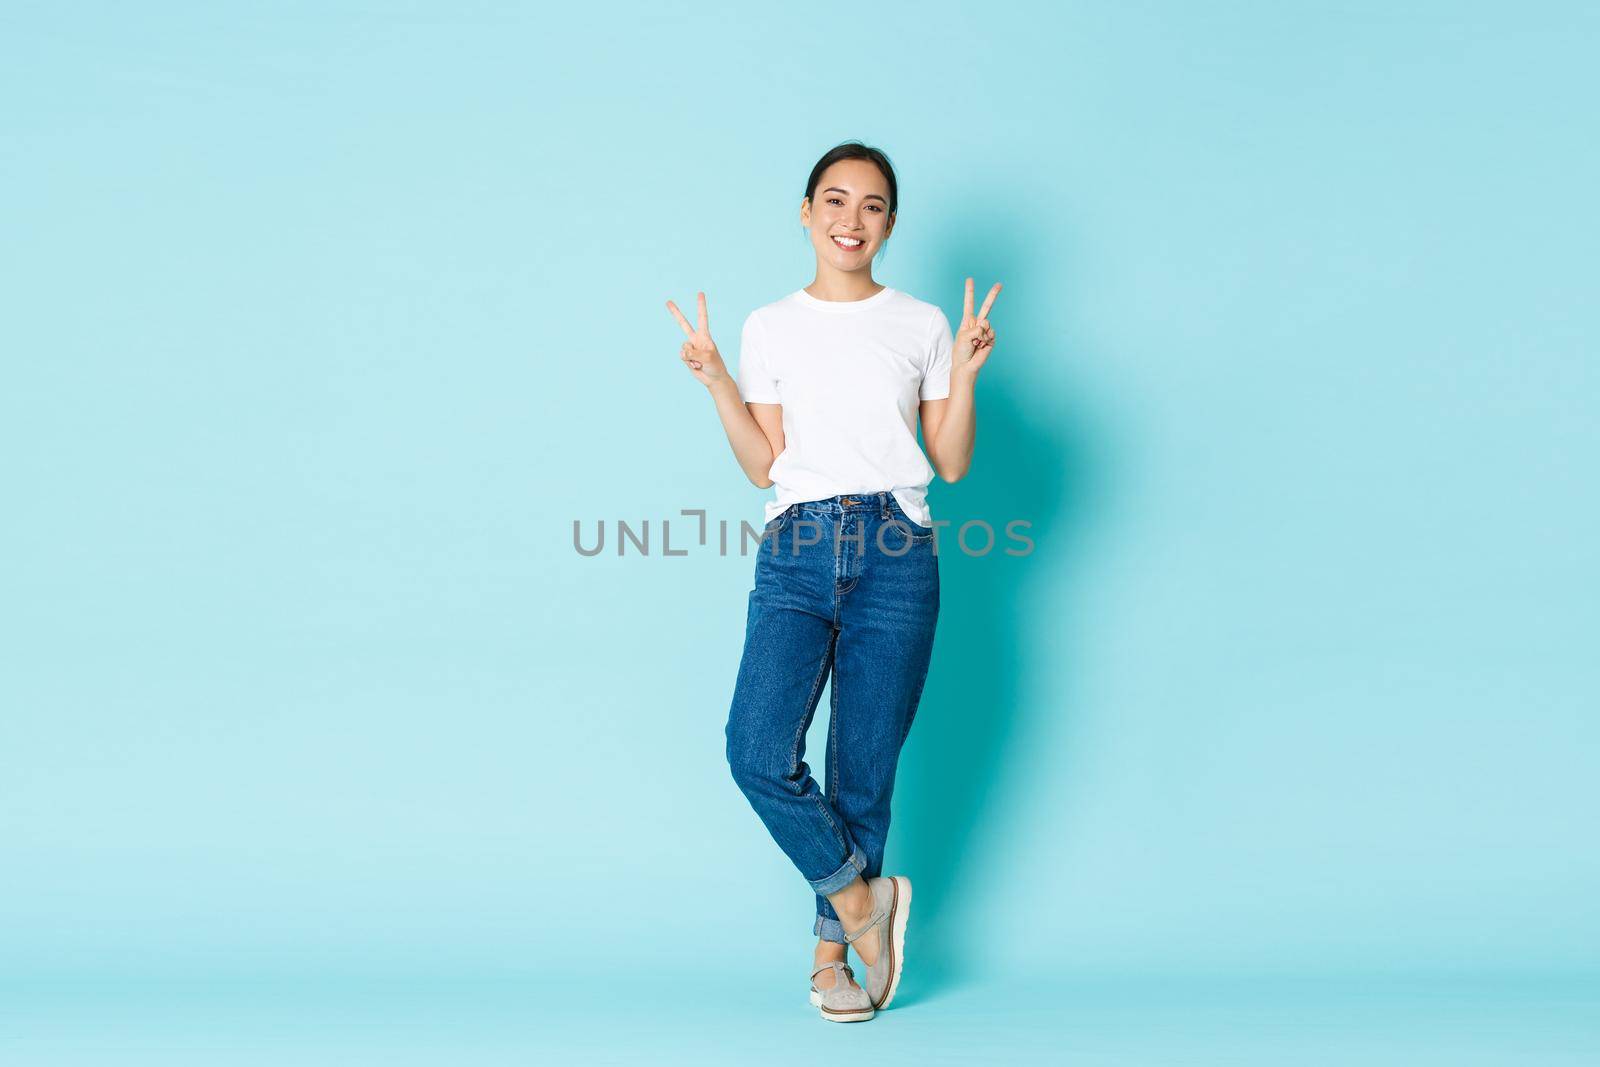 Fashion, beauty and lifestyle concept. Full-length portrait of adorable smiling asian woman in casual outfit, showing peace gestures and looking happy, standing light blue background.